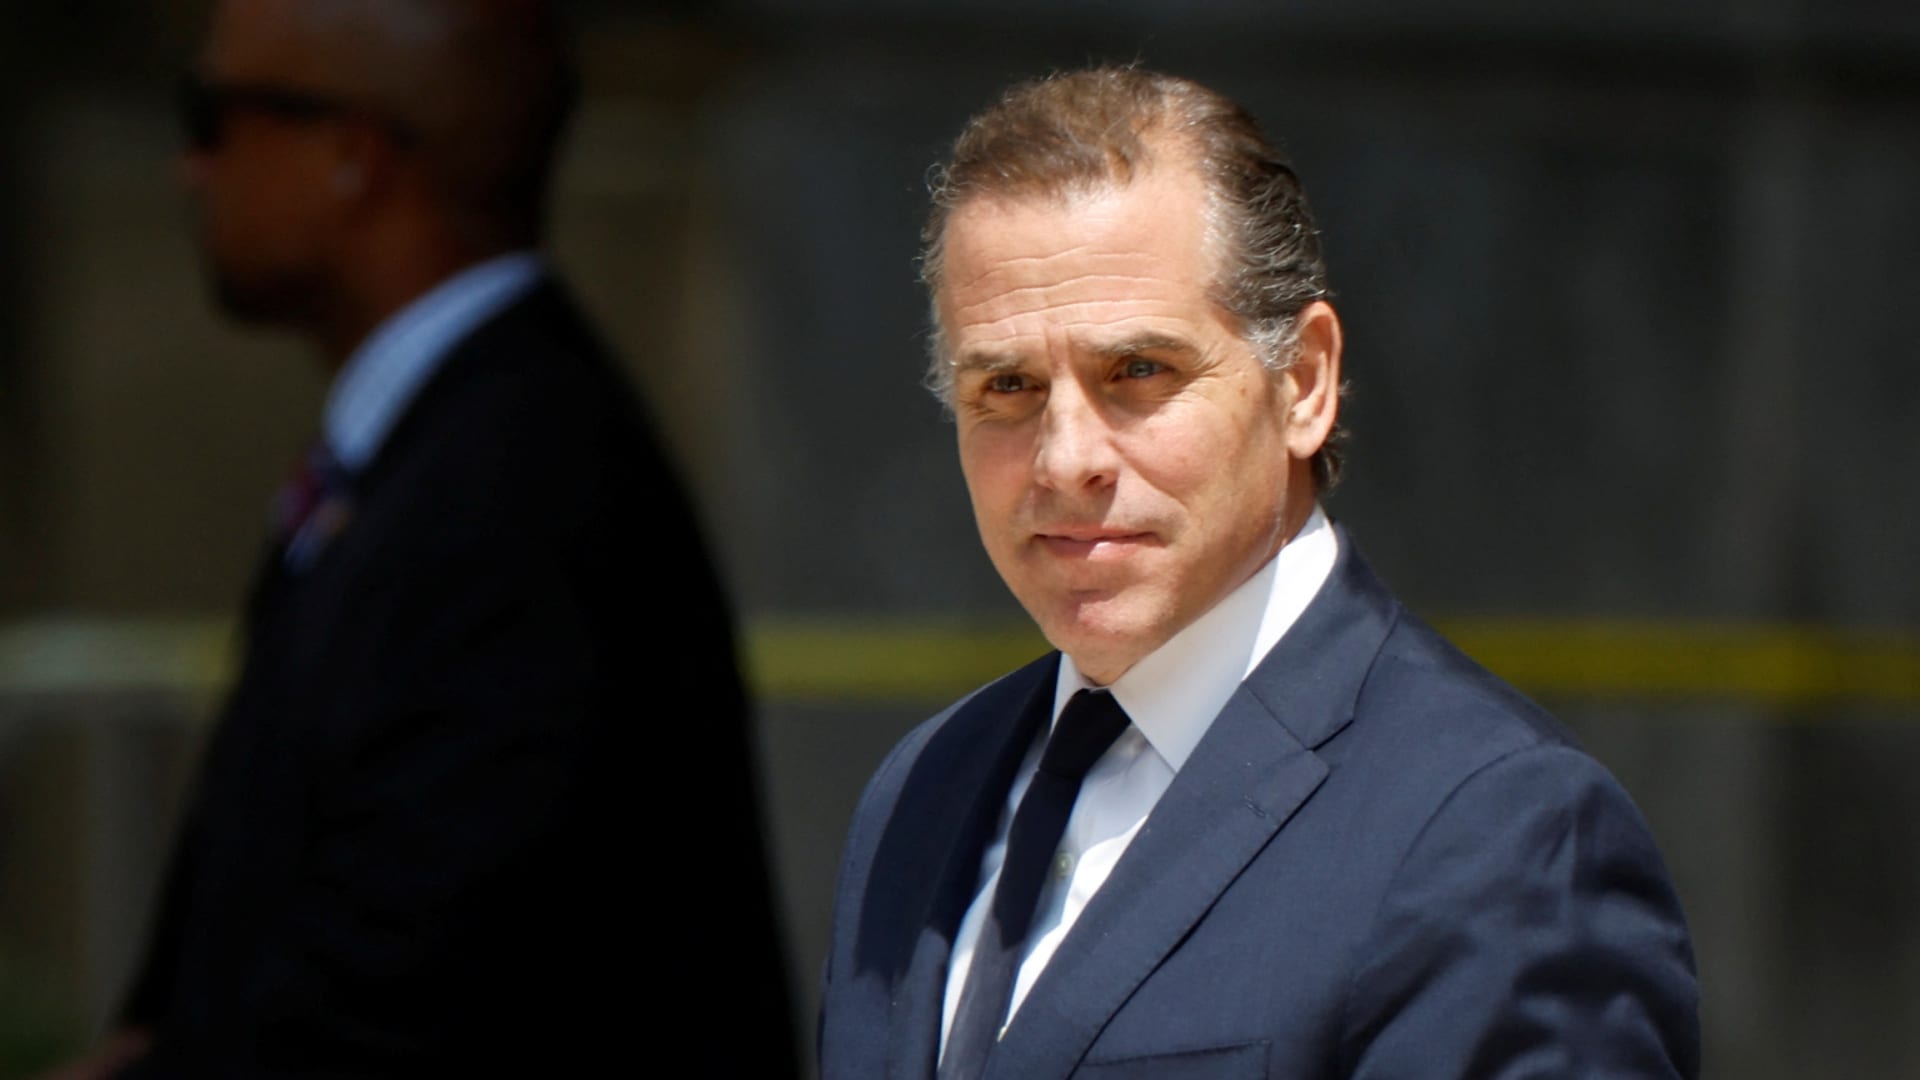 Hunter Biden, son of U.S. President Joe Biden, departs federal court after aplea hearing on two misdemeanor charges of willfully failing to pay income taxes in Wilmington, Delaware, July 26, 2023.